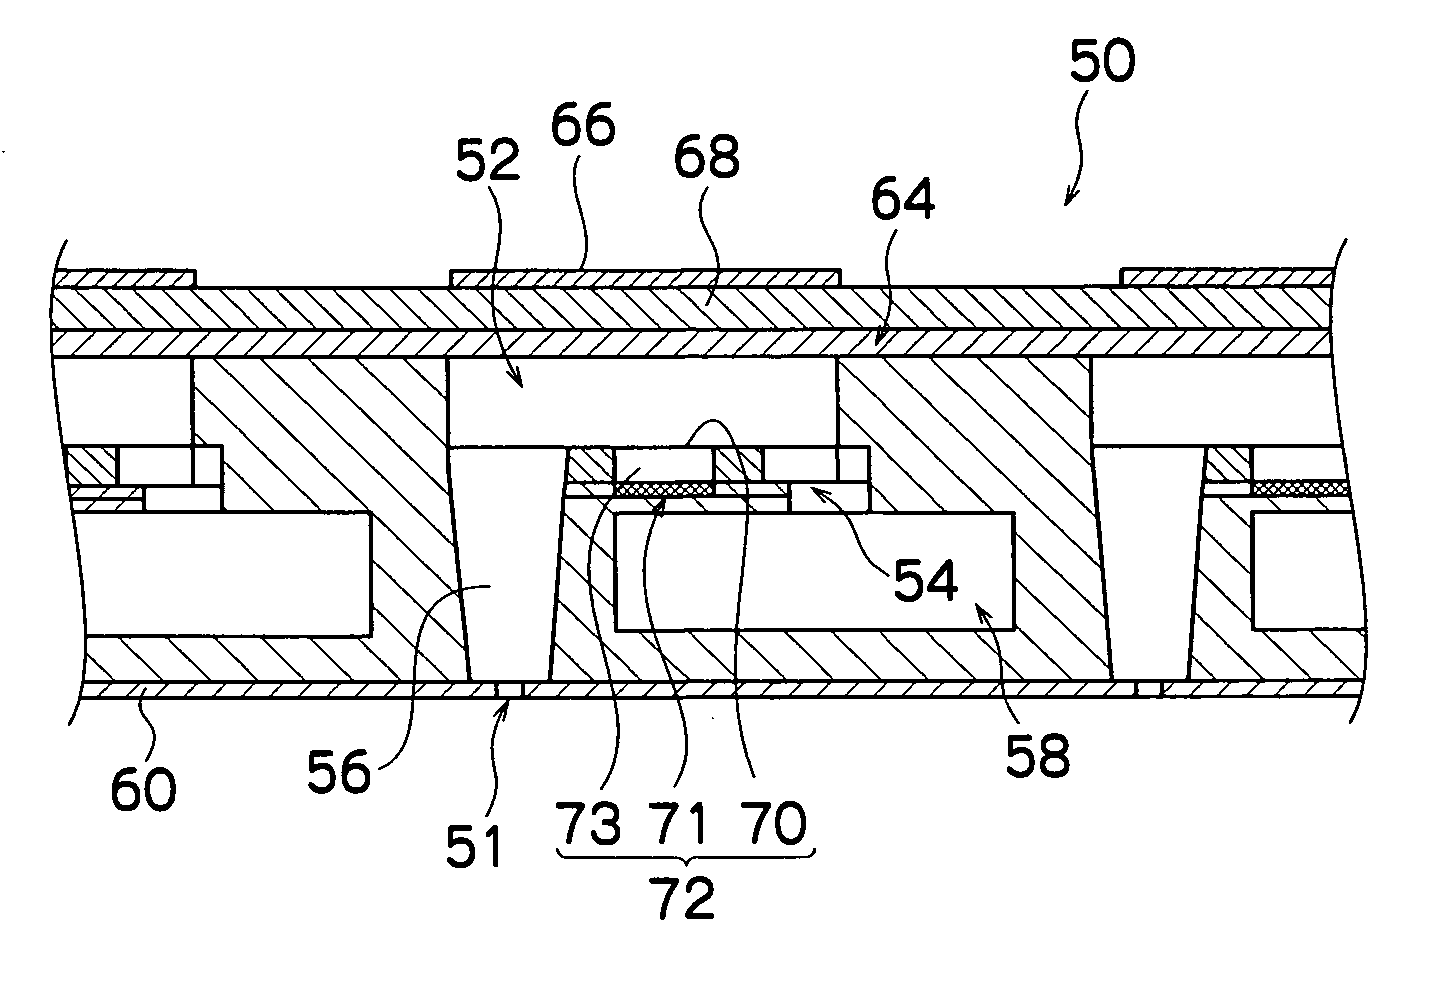 Discharge determination device and method